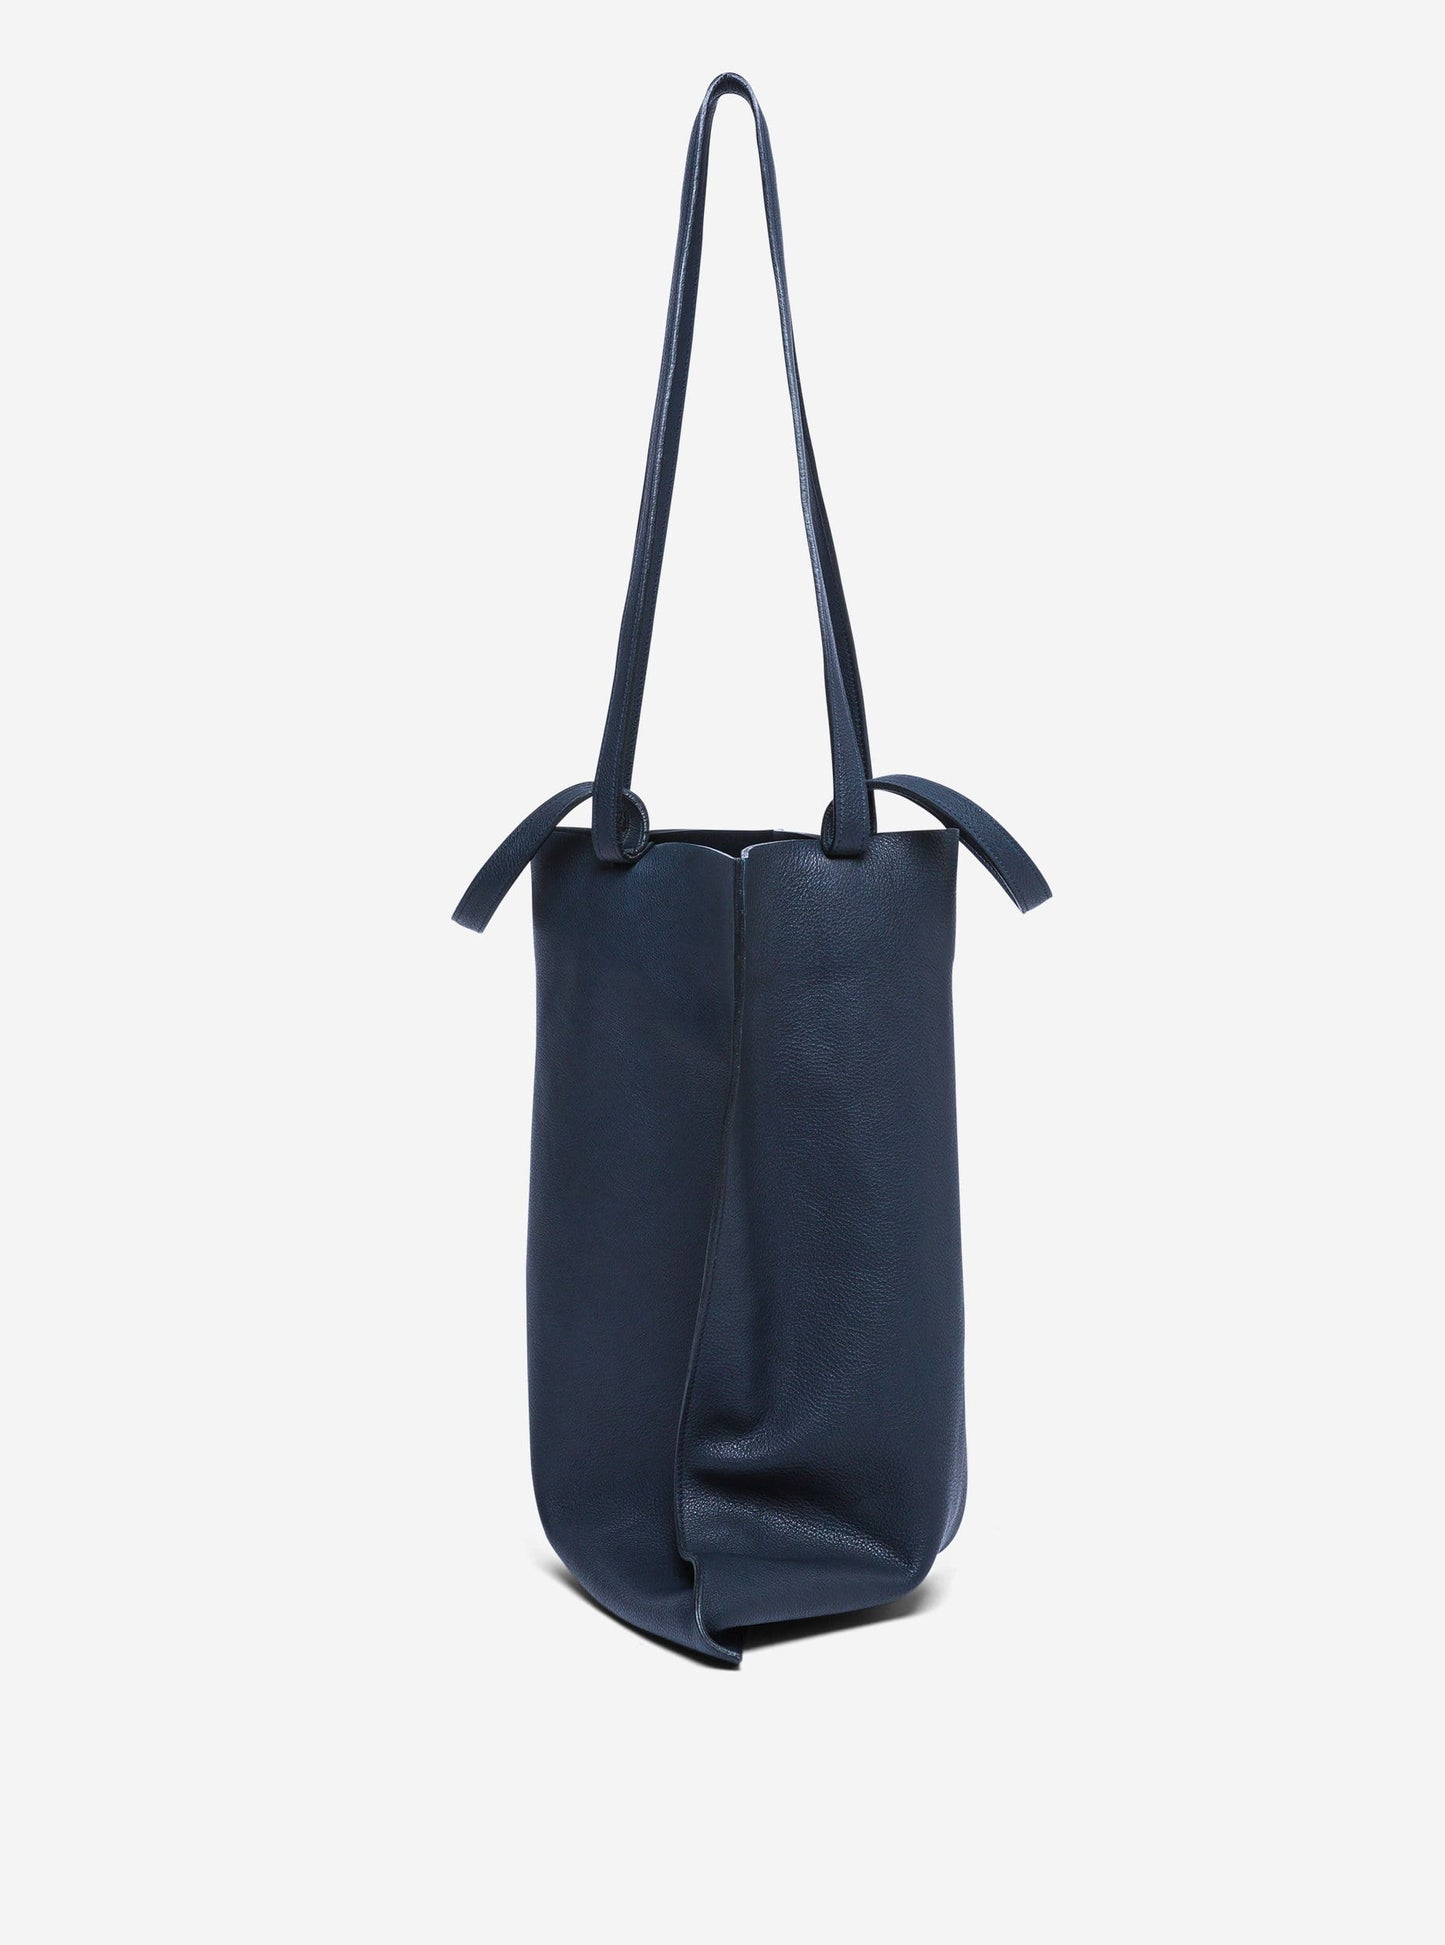  Tote bag for men and women